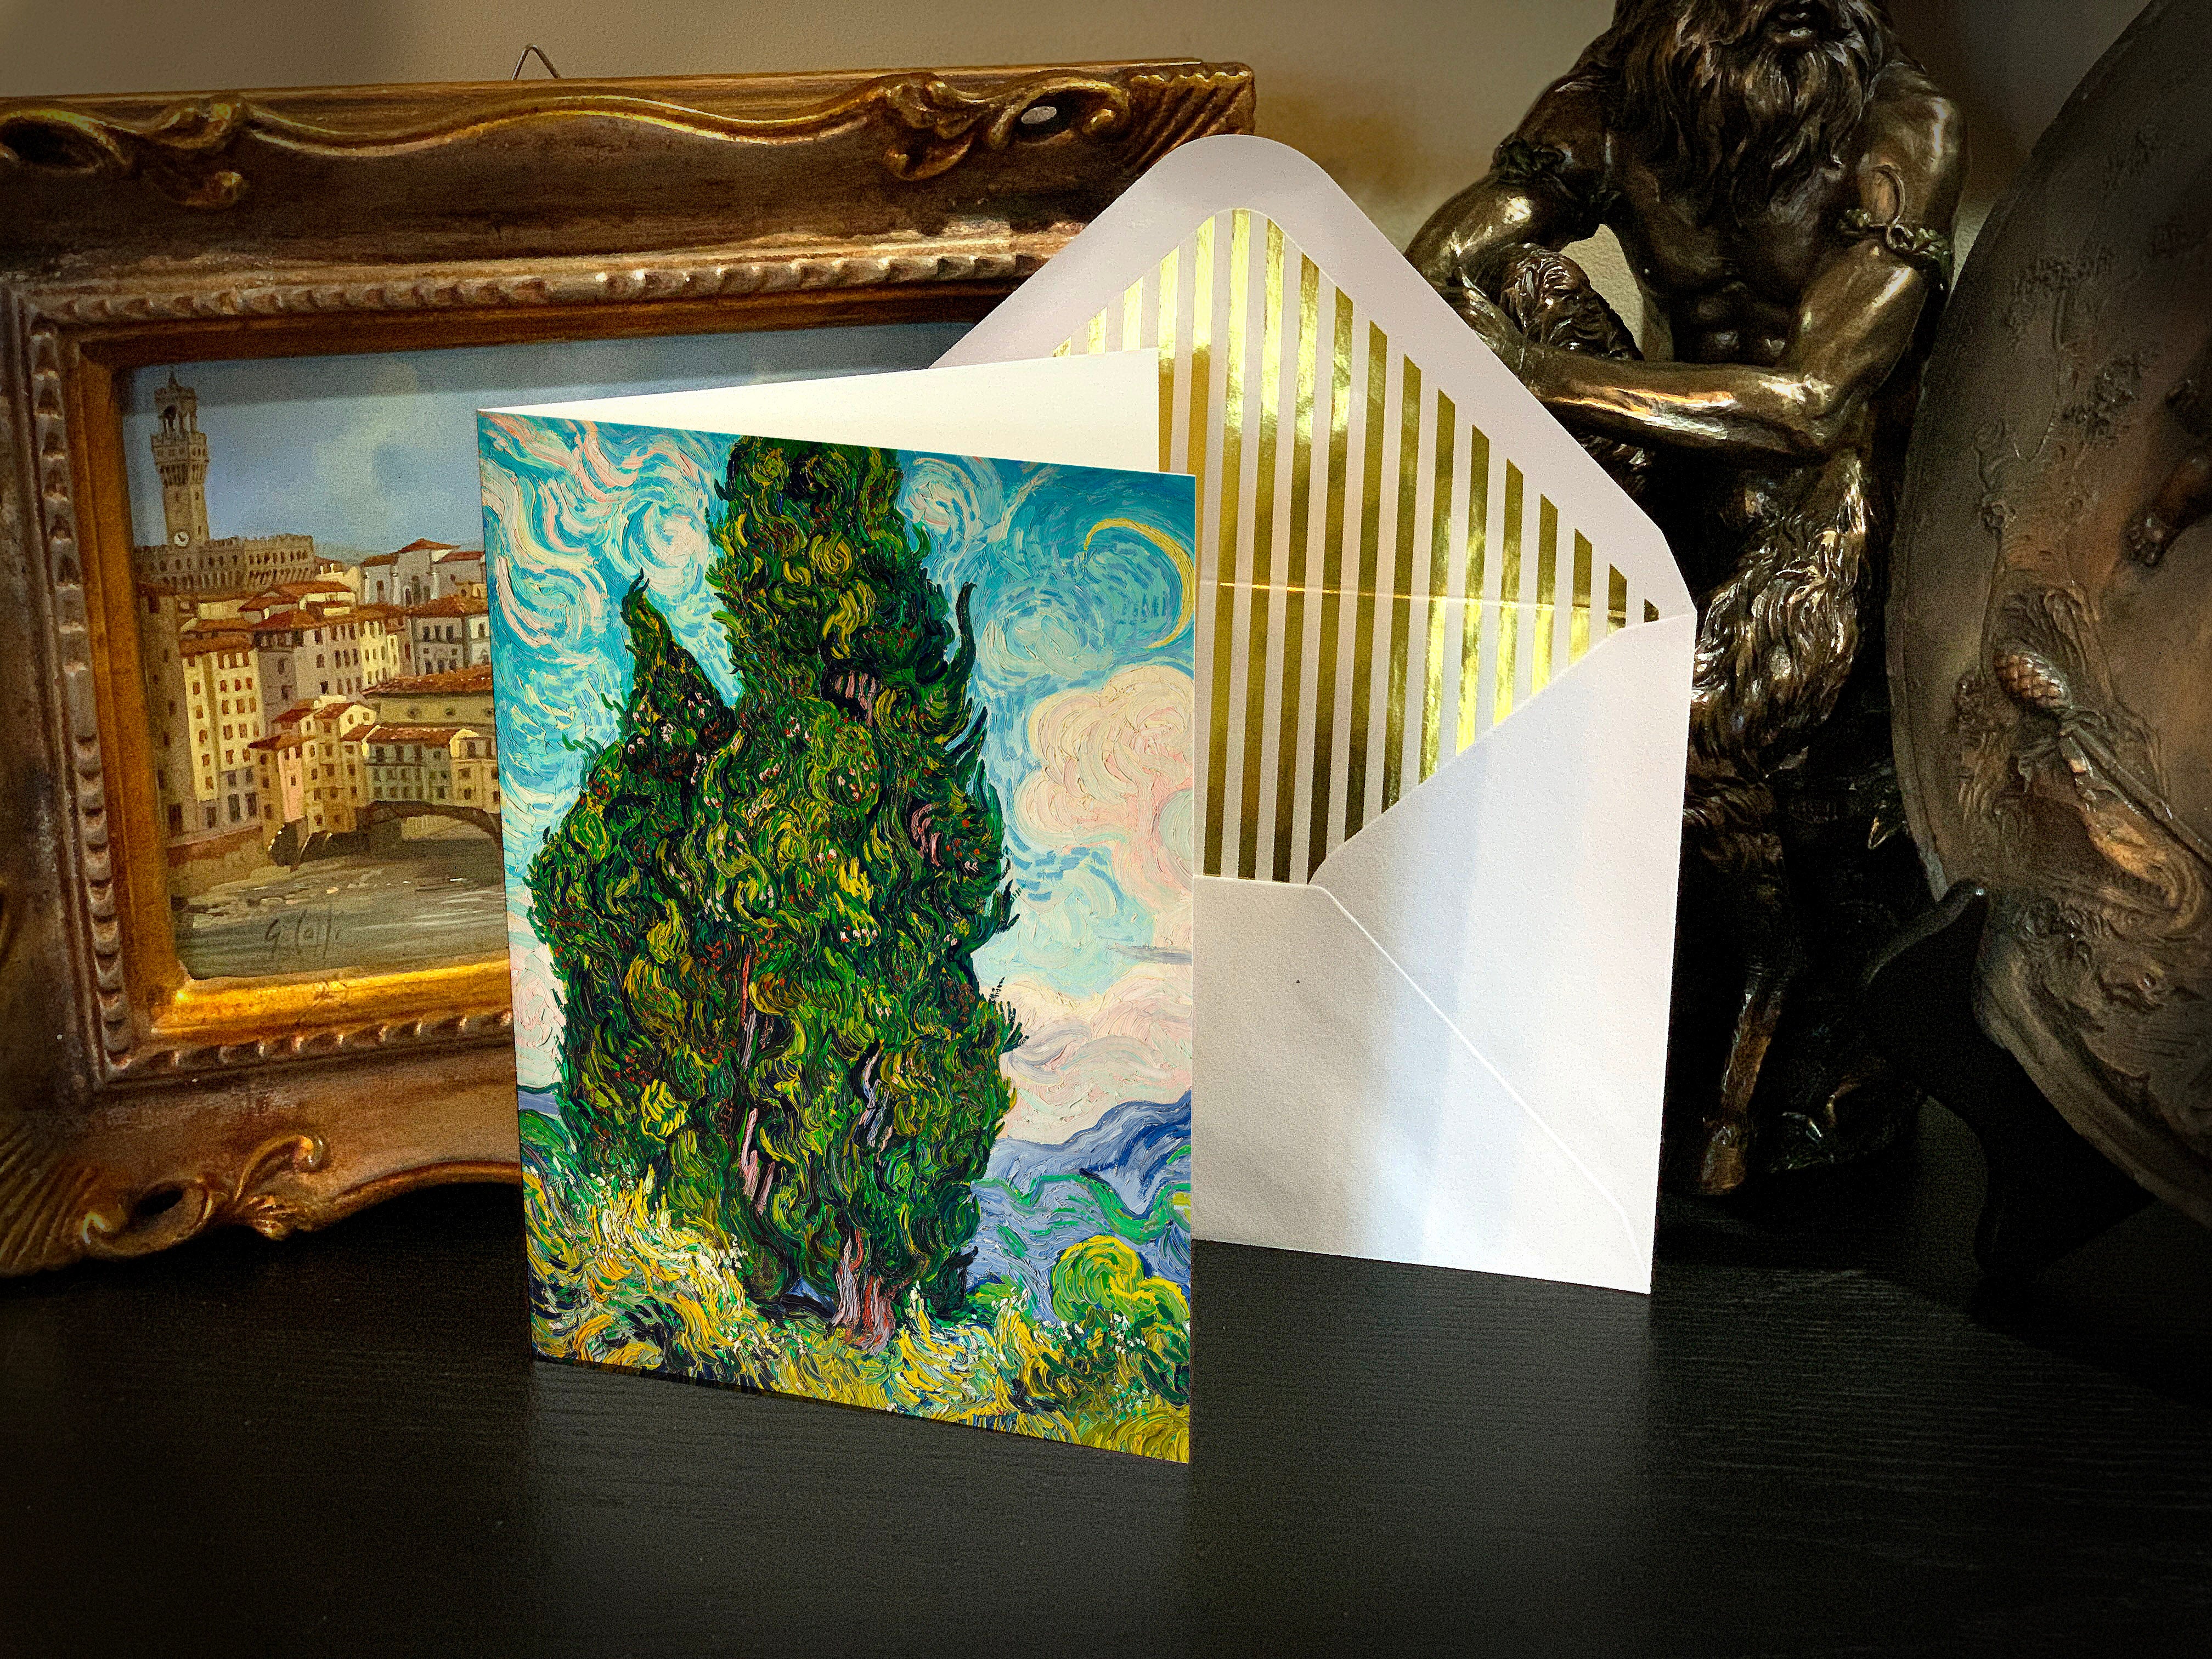 Van Gogh Countryside, Everyday Fine Art Greeting Cards with Elegant Striped Gold Foil Envelopes, 5in x 7in, 5 Cards/5 Envelopes